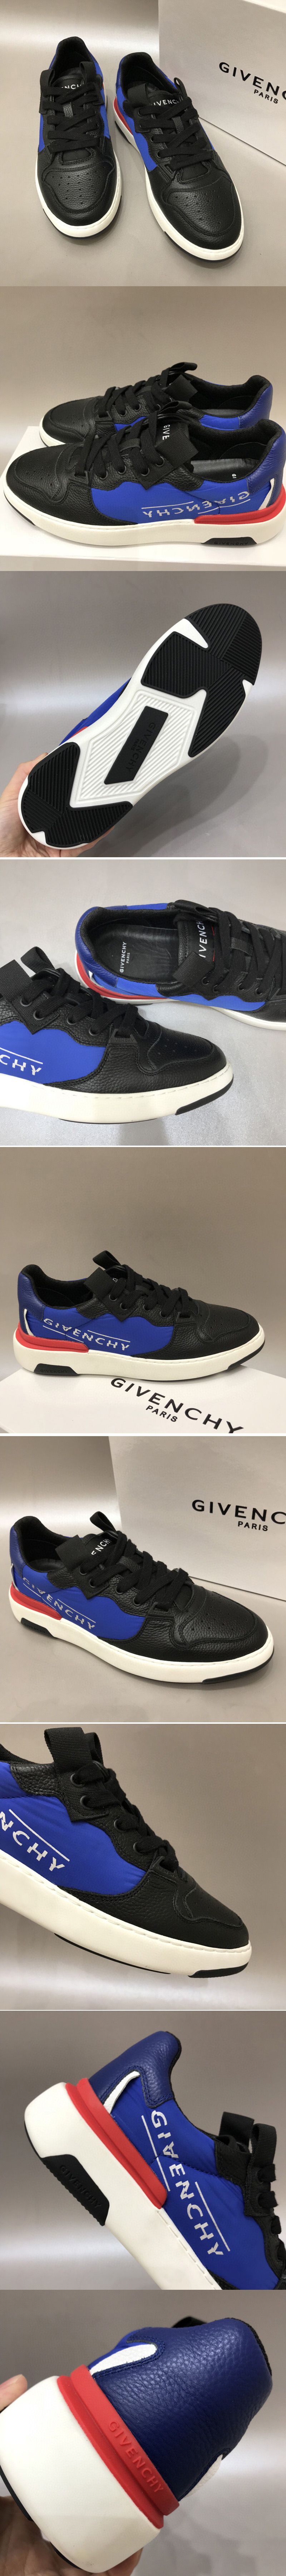 Replica Givenchy Shoes